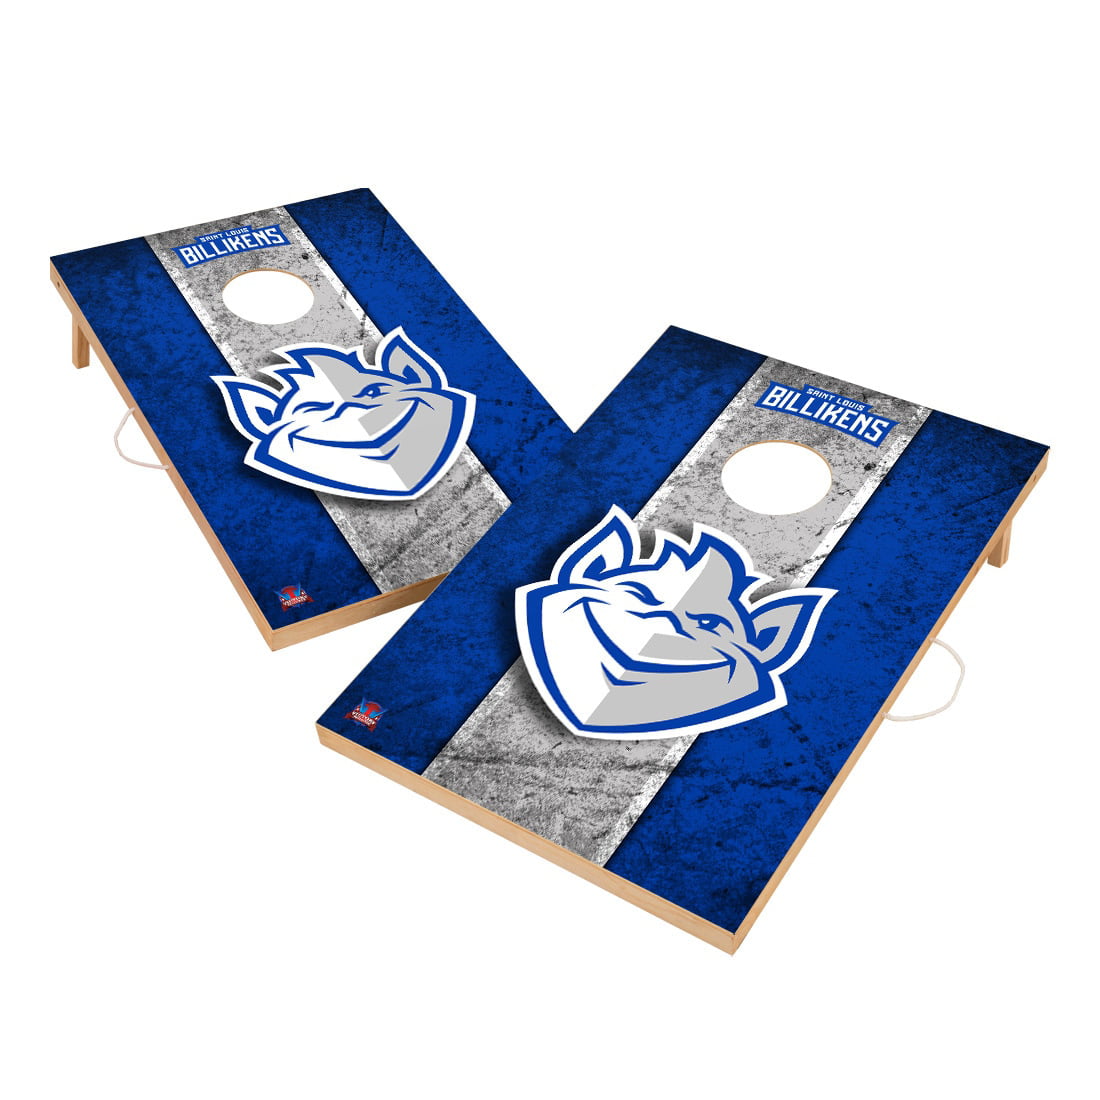 NORTH CAROLINA STATE NCS WOLFPACK CORNHOLE BEAN BAGS 8 TOSS GAME FREE SHIPPING 